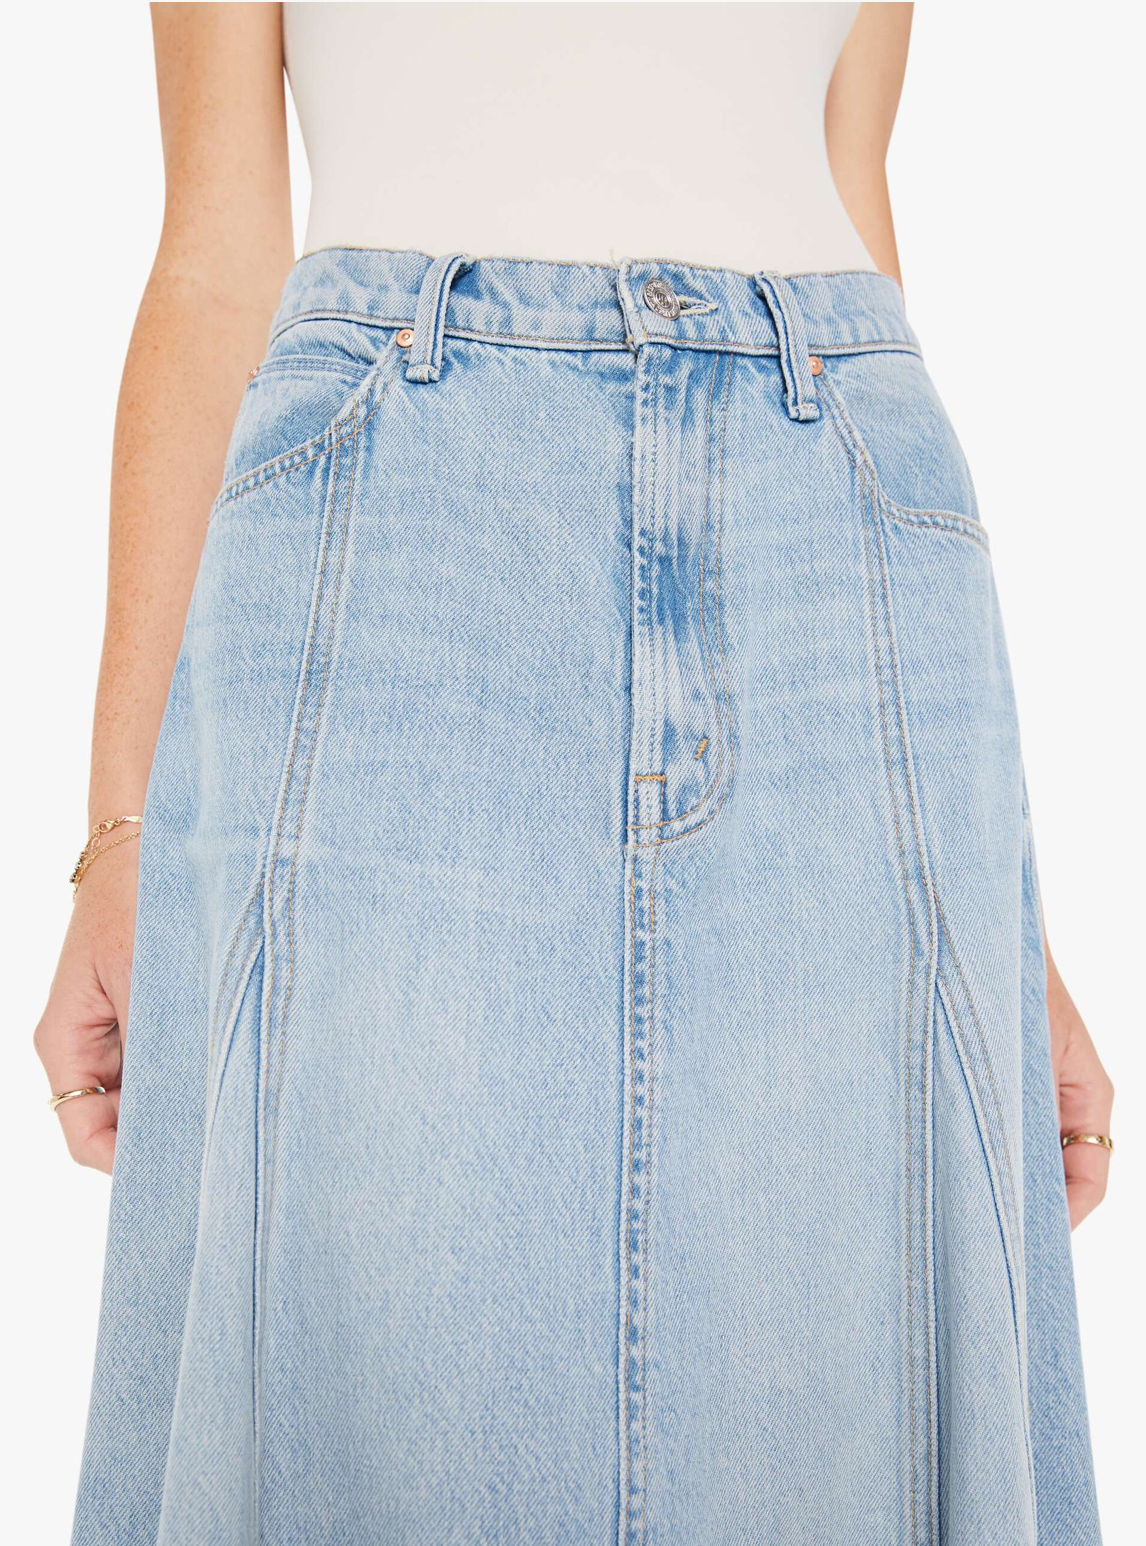 Close-up view of a woman wearing The Full Swing I&#39;m With The Band denim skirt, showing details from waist to mid-thigh, with a focus on the skirt&#39;s stitching and Arizona-style fabric texture.